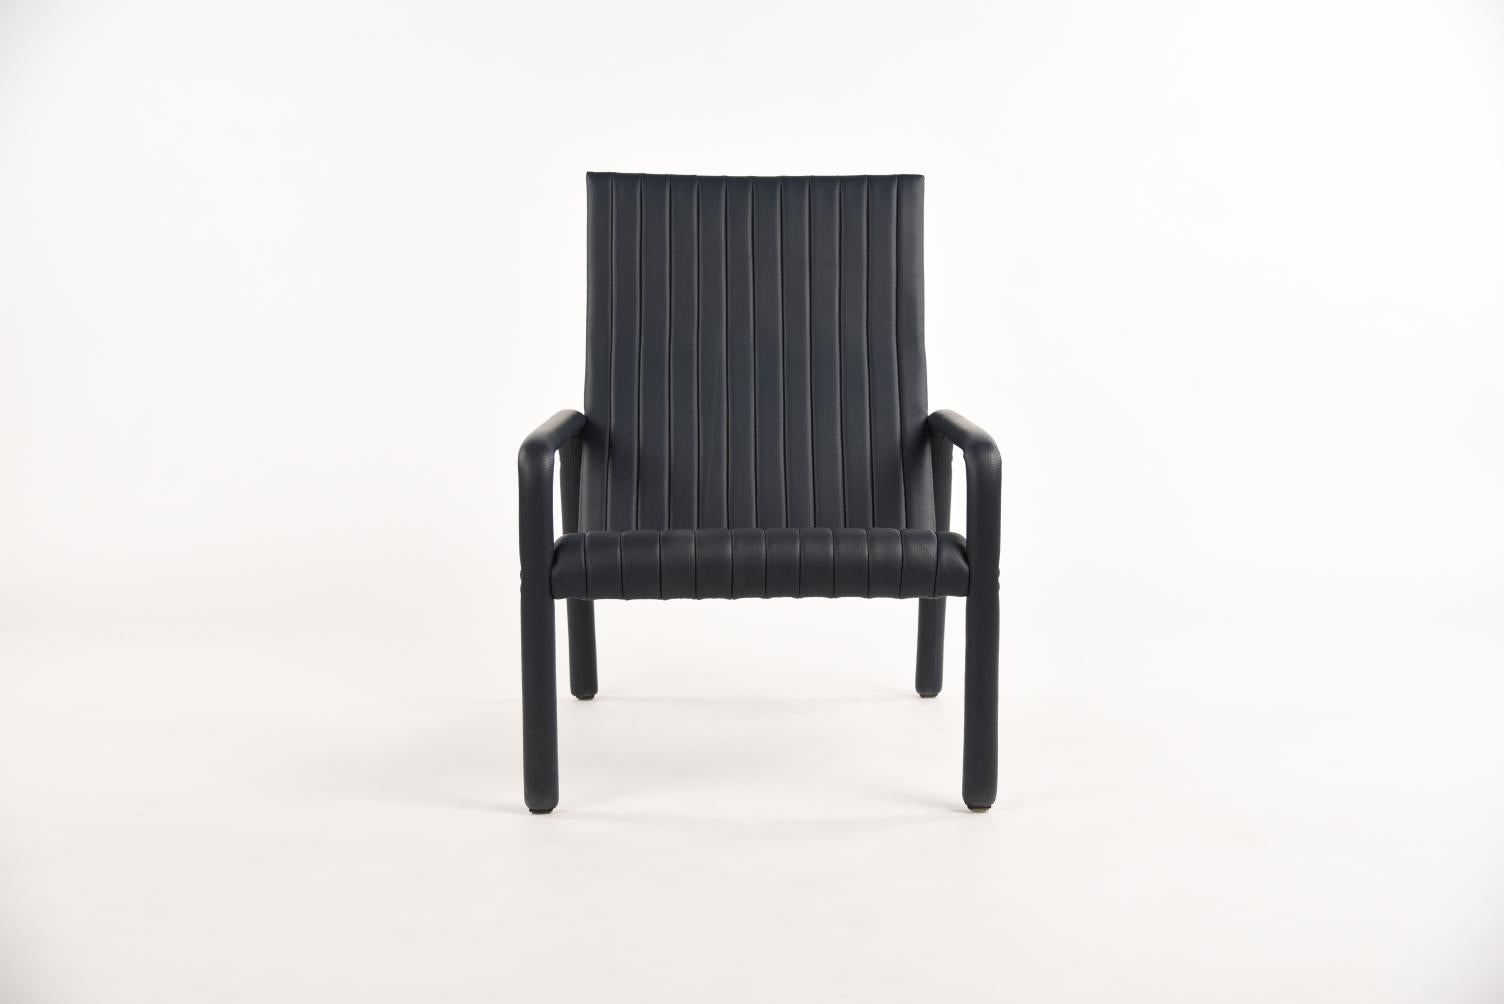 The Alexander street lounge chair by Philippe Malouin evokes the leather sports seats of iconic sports cars of the 1980s he grew up with on Alexander Street in Montreal. Ribbed and perforated leather is handstitched over the entire piece. The sturdy